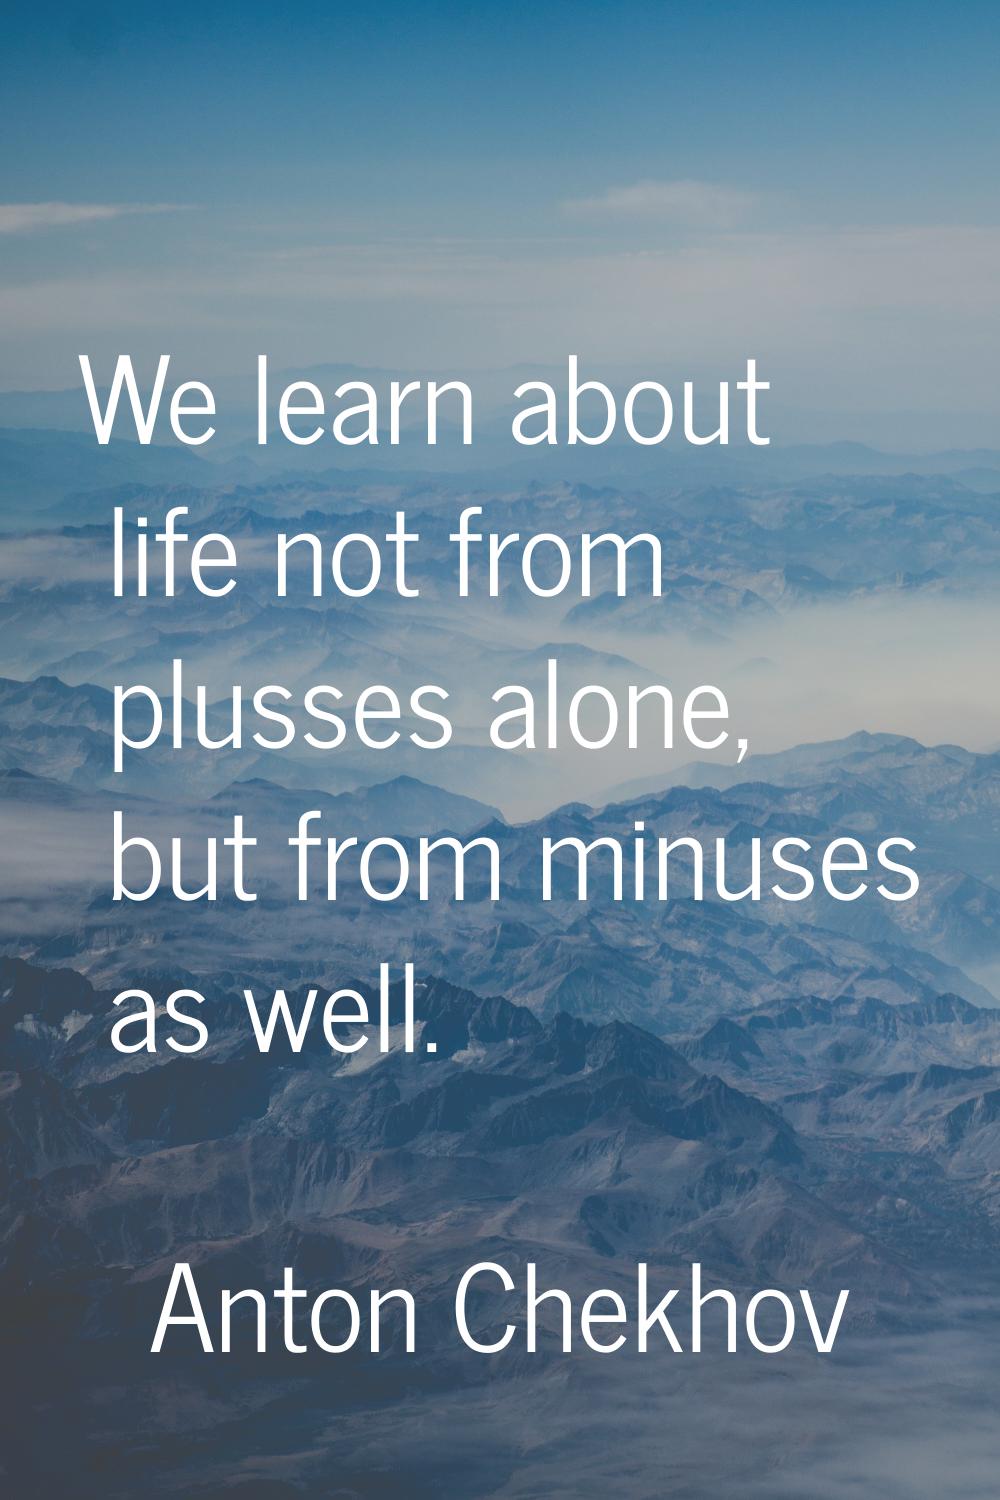 We learn about life not from plusses alone, but from minuses as well.